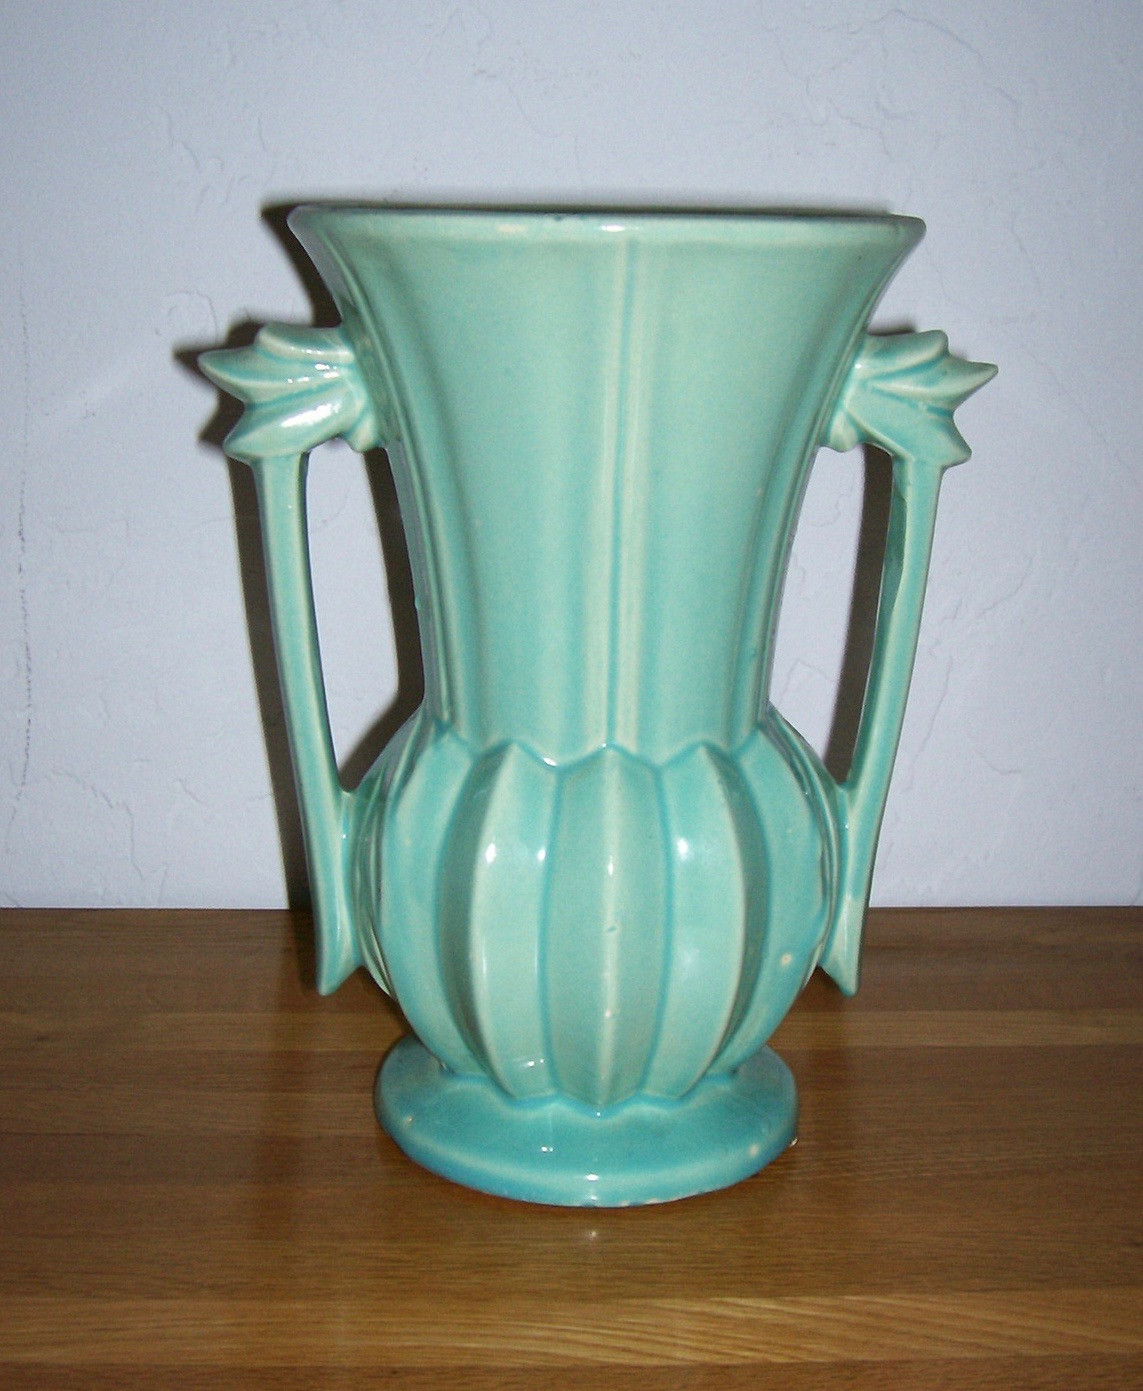 25 Cute Mccoy Vases for Sale 2024 free download mccoy vases for sale of ask the mpcs forum mccoy pottery collectors society within a friend gave me a mccoy vase in the early 1980s which she bought at a houston tx antiques store id be very